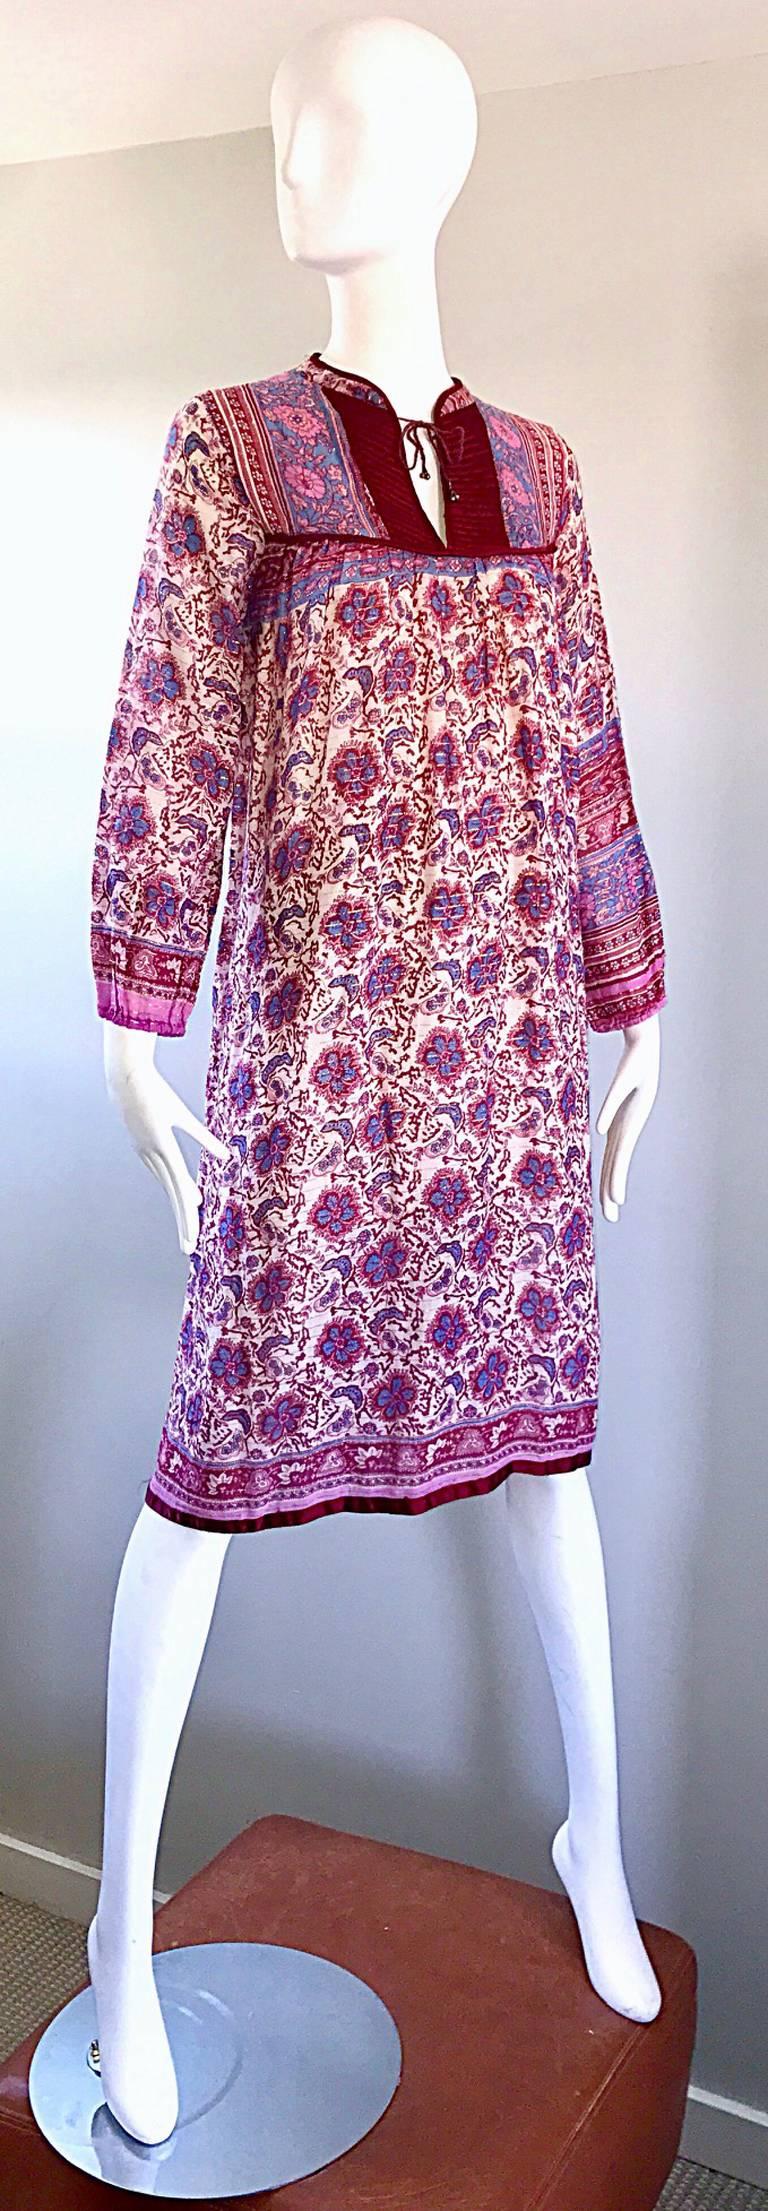 Chic 1970s Pink Purple Paisley and Flowers Ethnic Boho Hippie Vintage 70s Dress 2